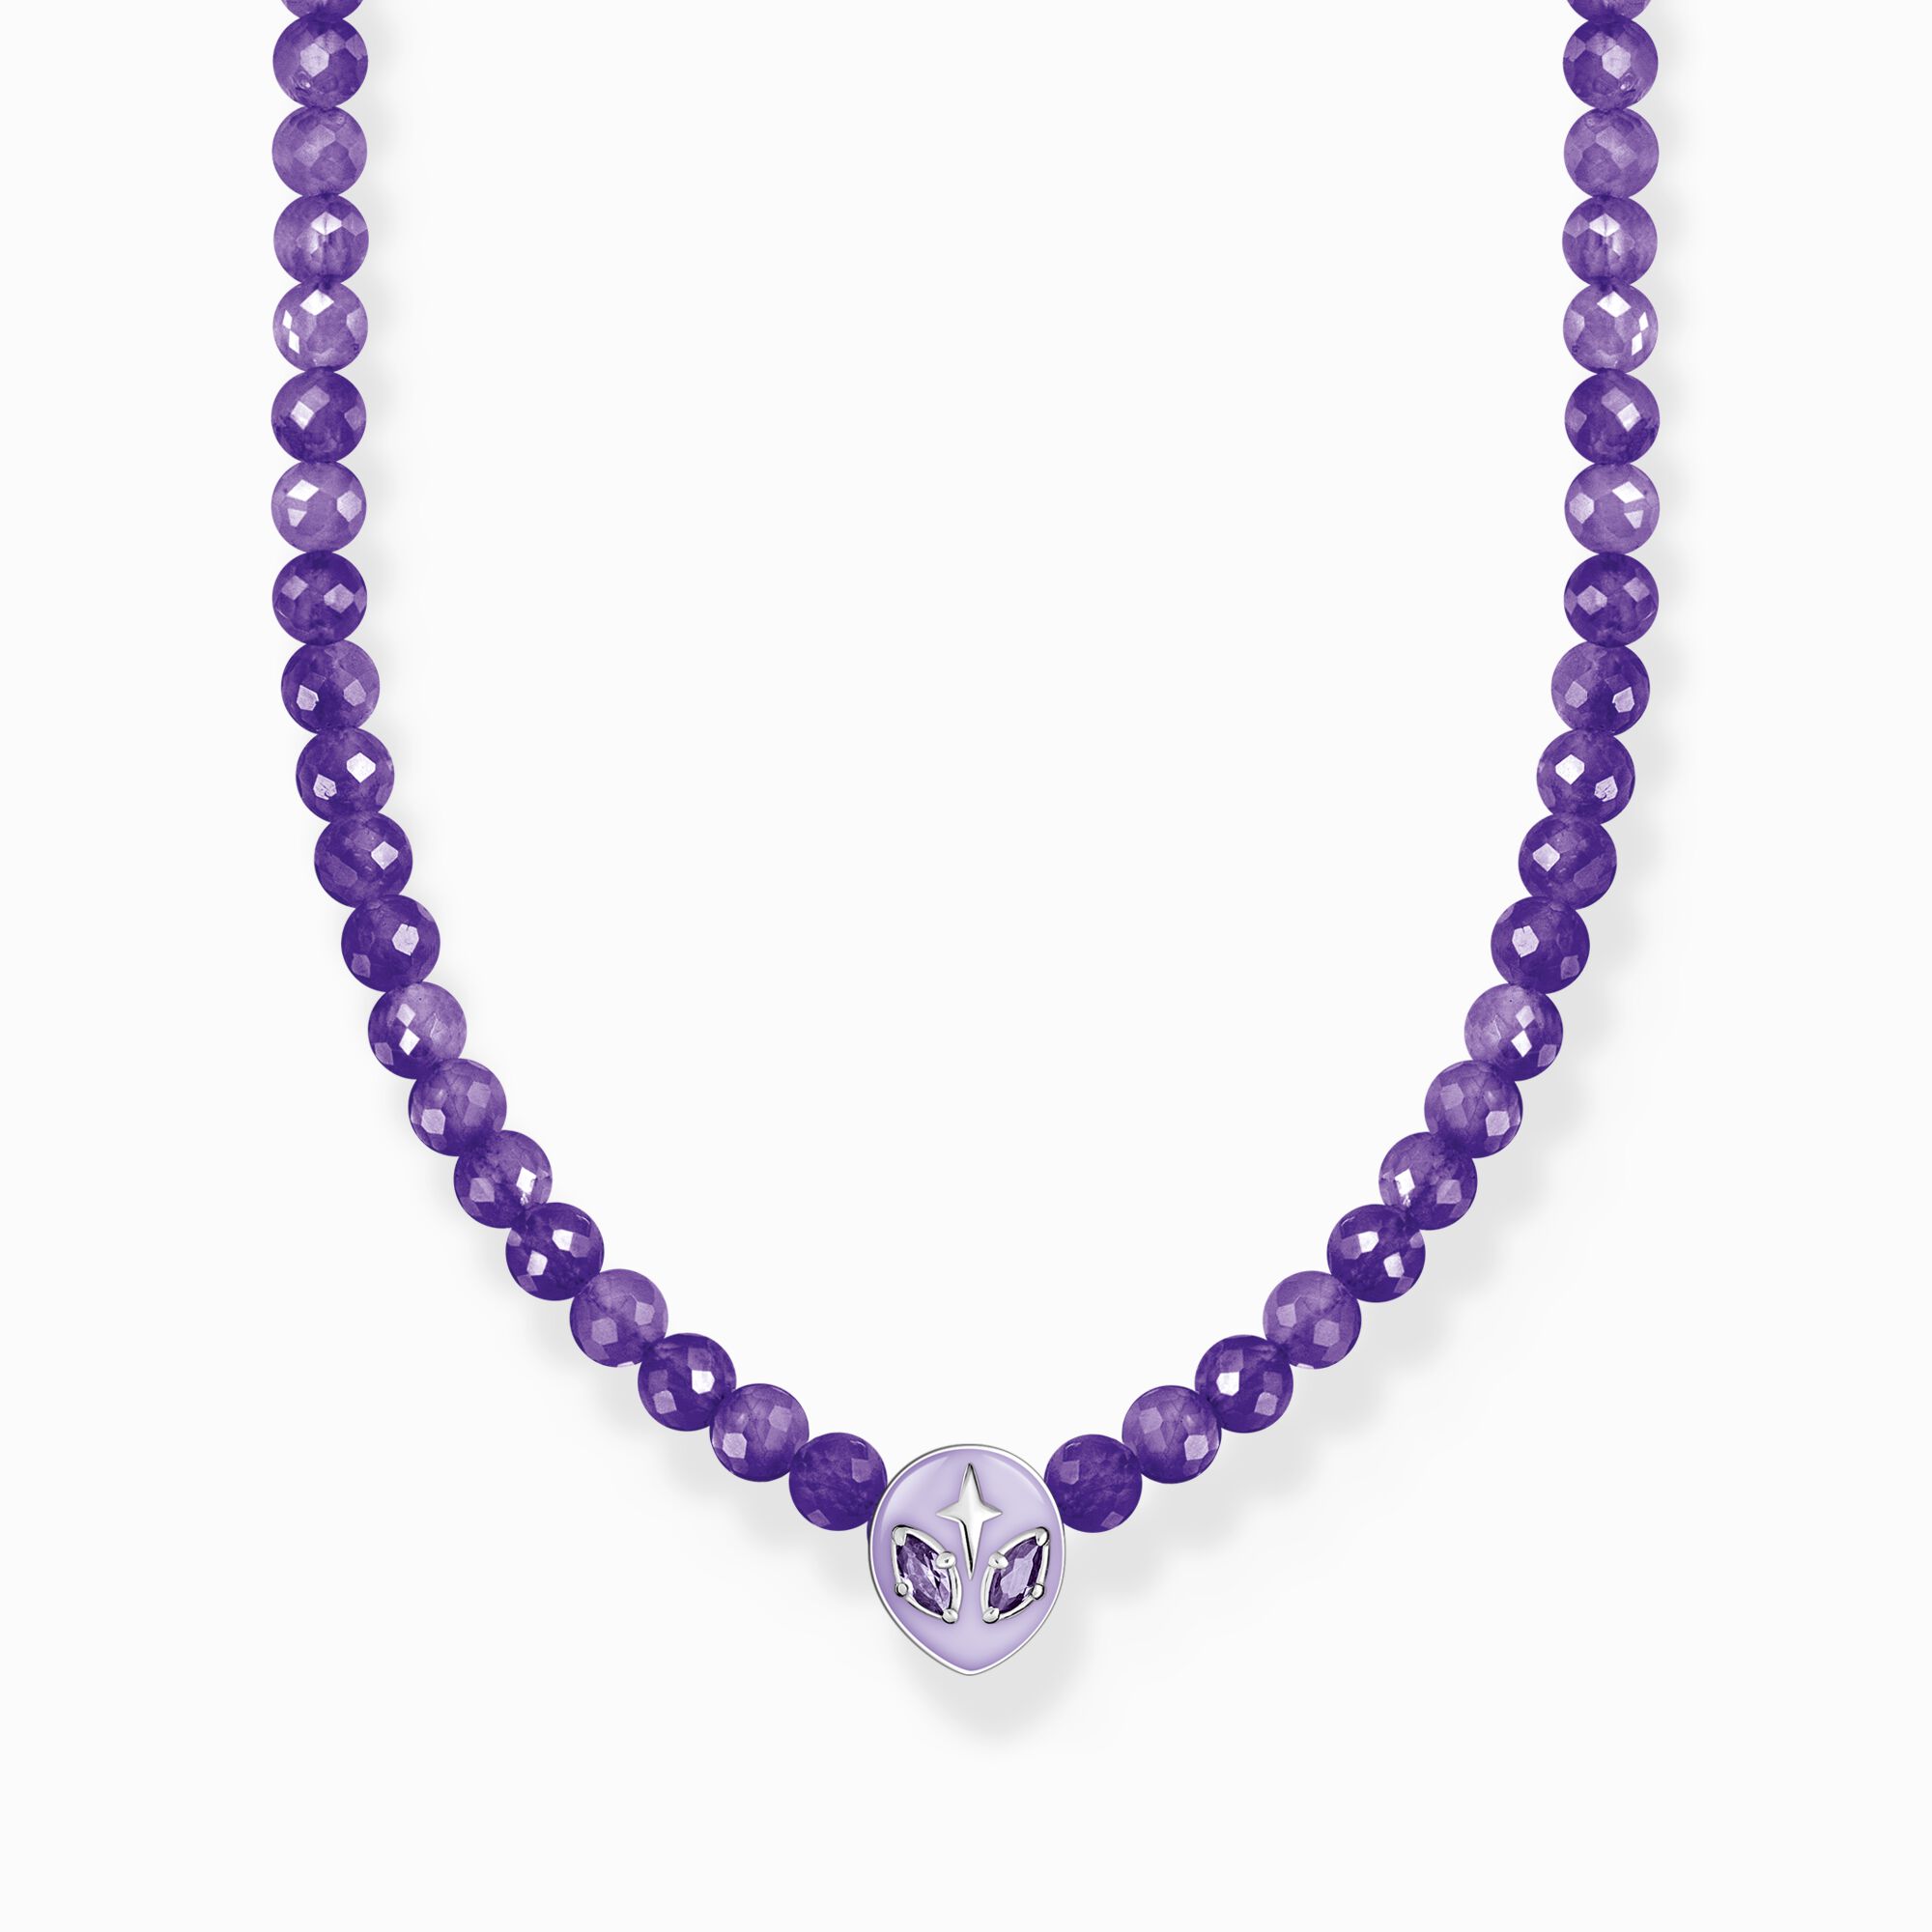 Necklace with imitation amethyst beads silver from the Charming Collection collection in the THOMAS SABO online store